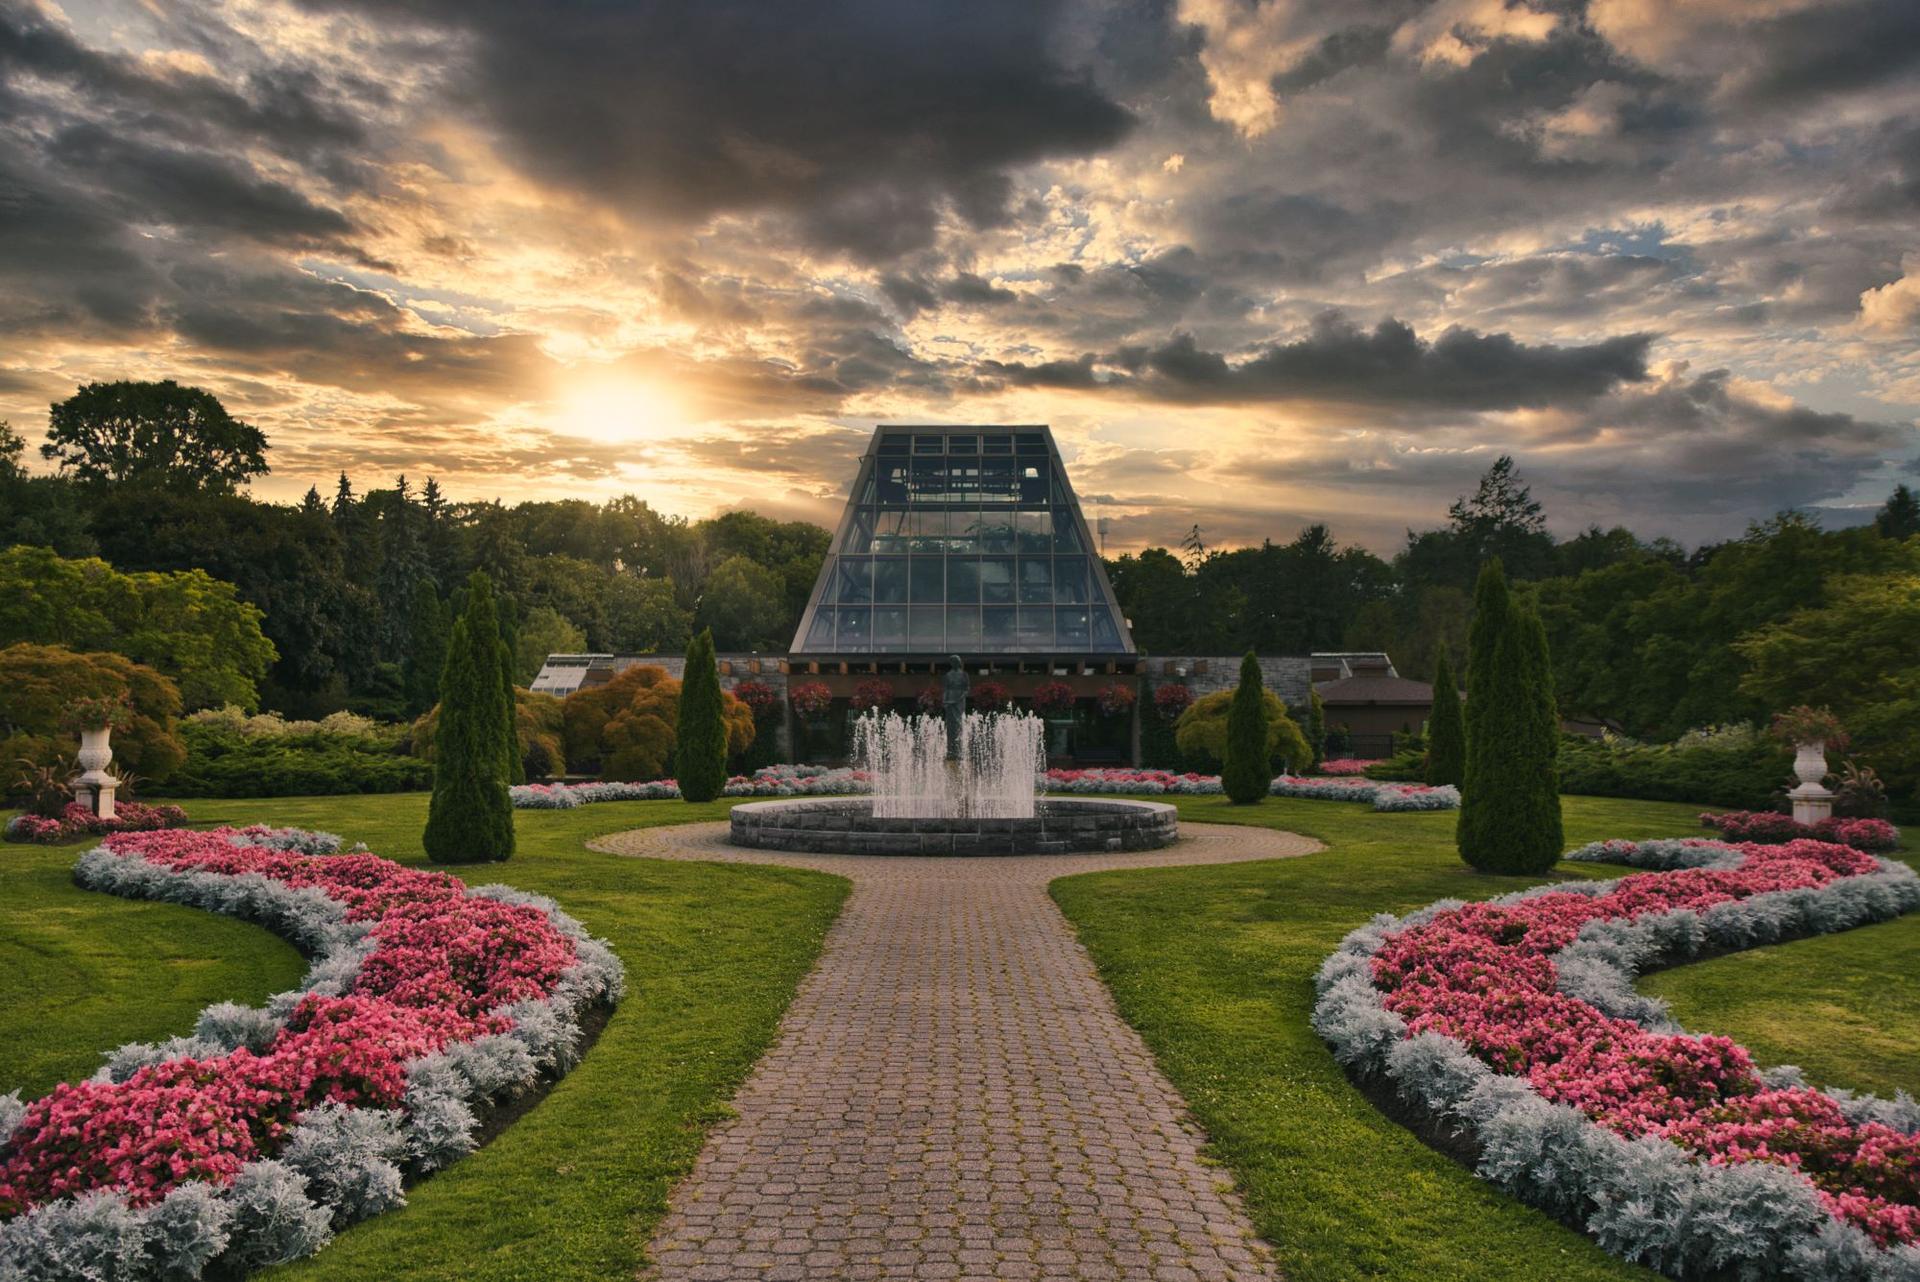 Photo of the Niagara Parks Floral Showhouse